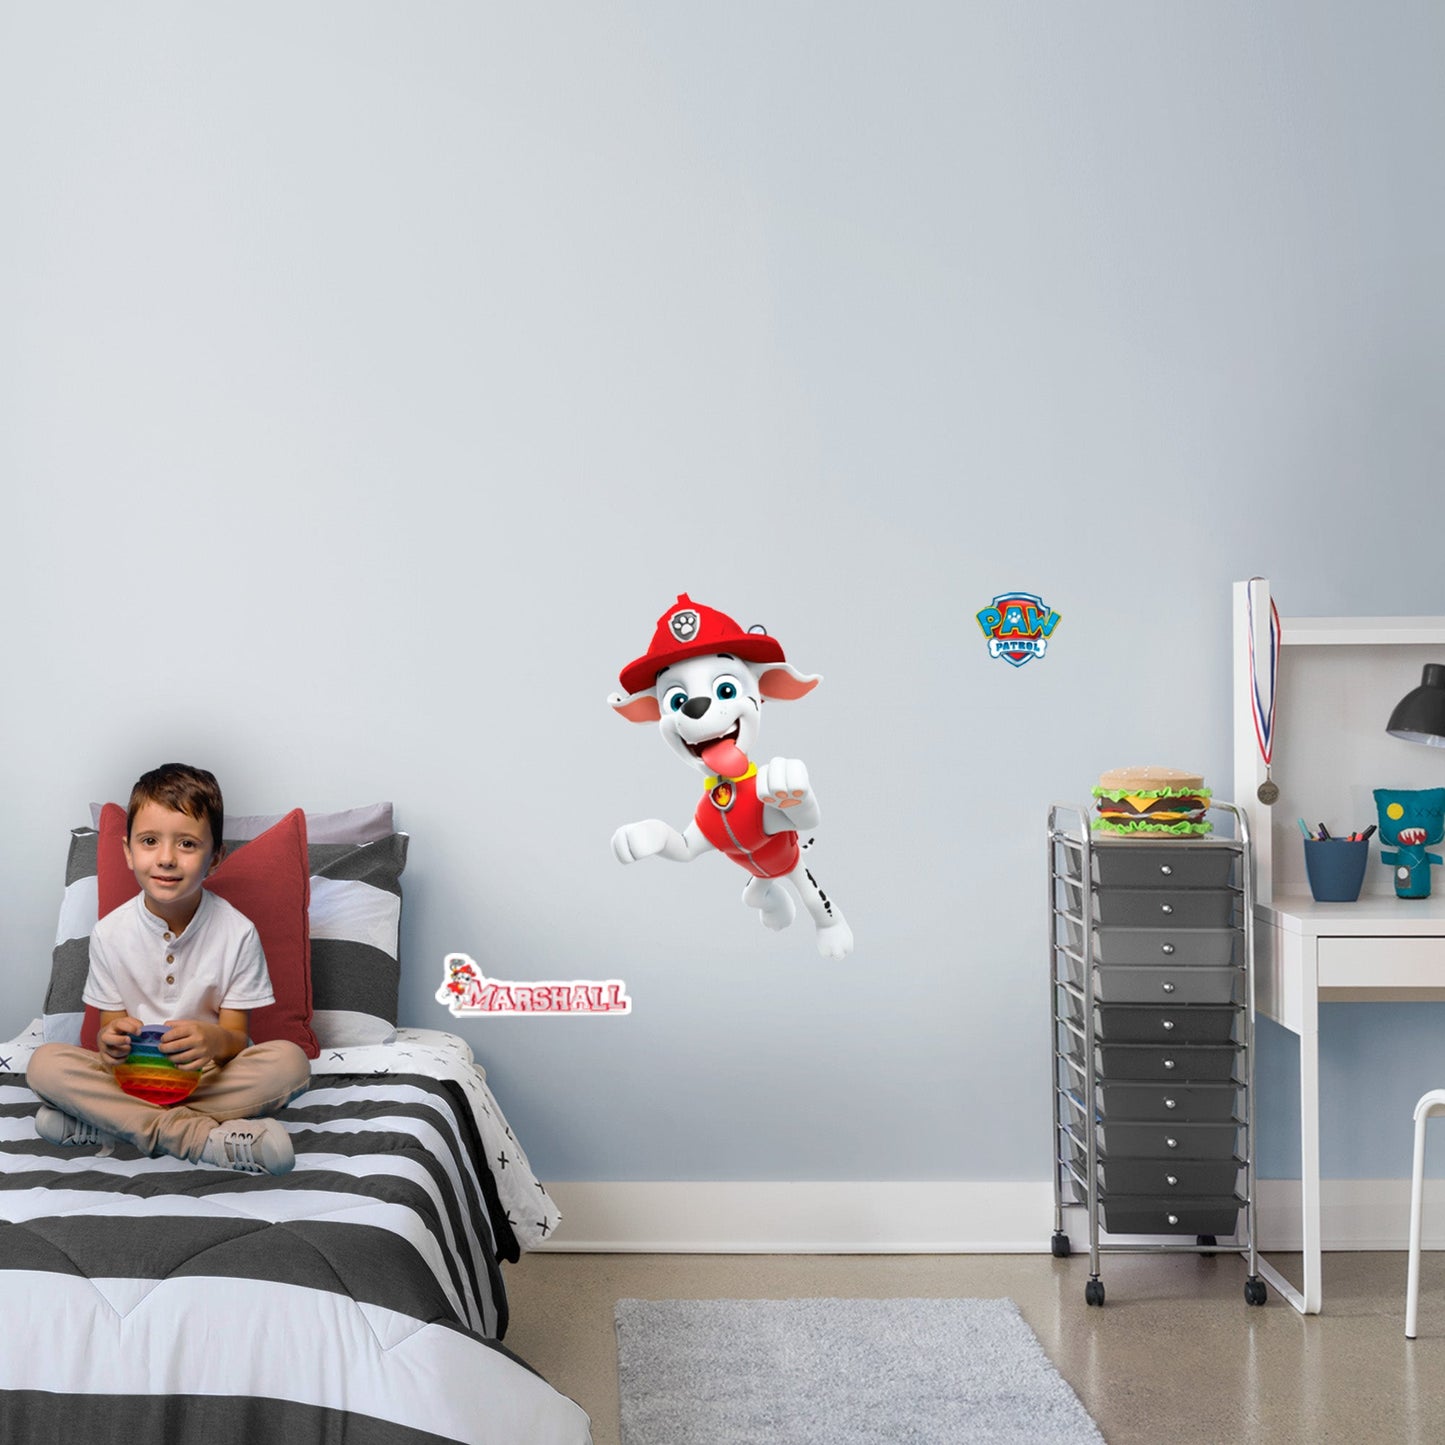 Paw Patrol: Marshall RealBig - Officially Licensed Nickelodeon Removable Adhesive Decal